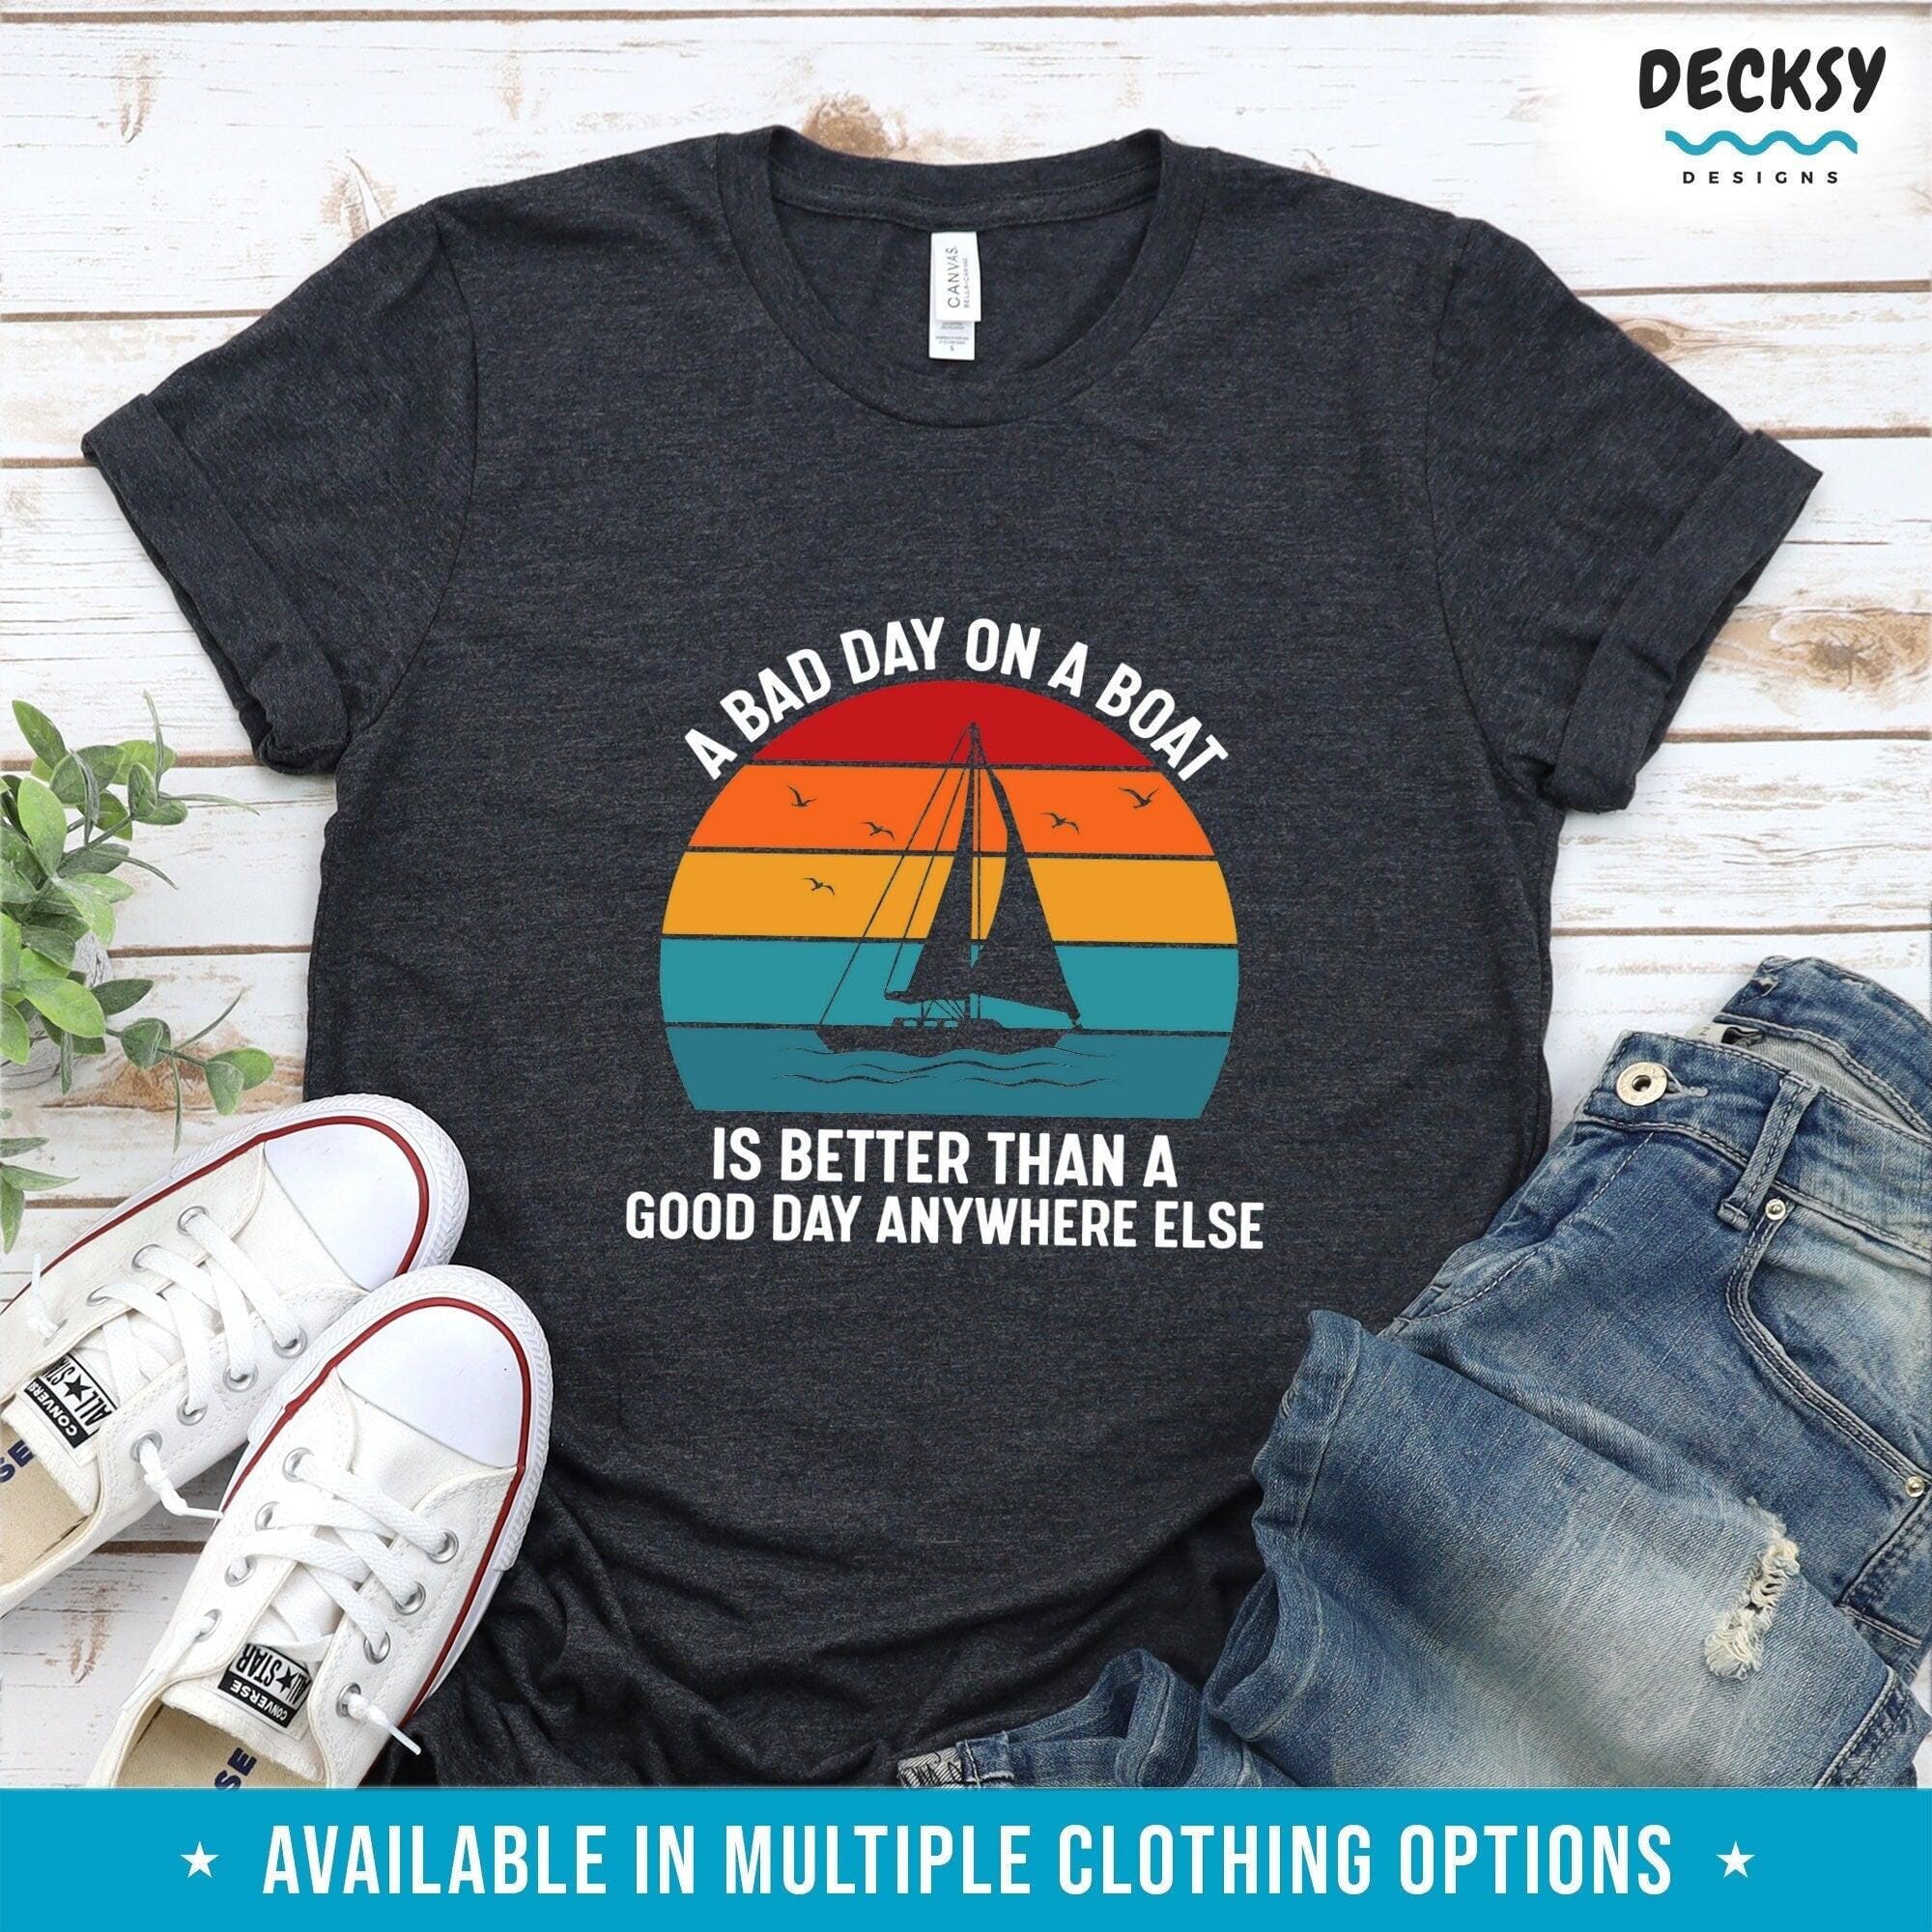 Boat Lover Shirt, Funny Boating Gift-Clothing:Gender-Neutral Adult Clothing:Tops & Tees:T-shirts:Graphic Tees-DecksyDesigns